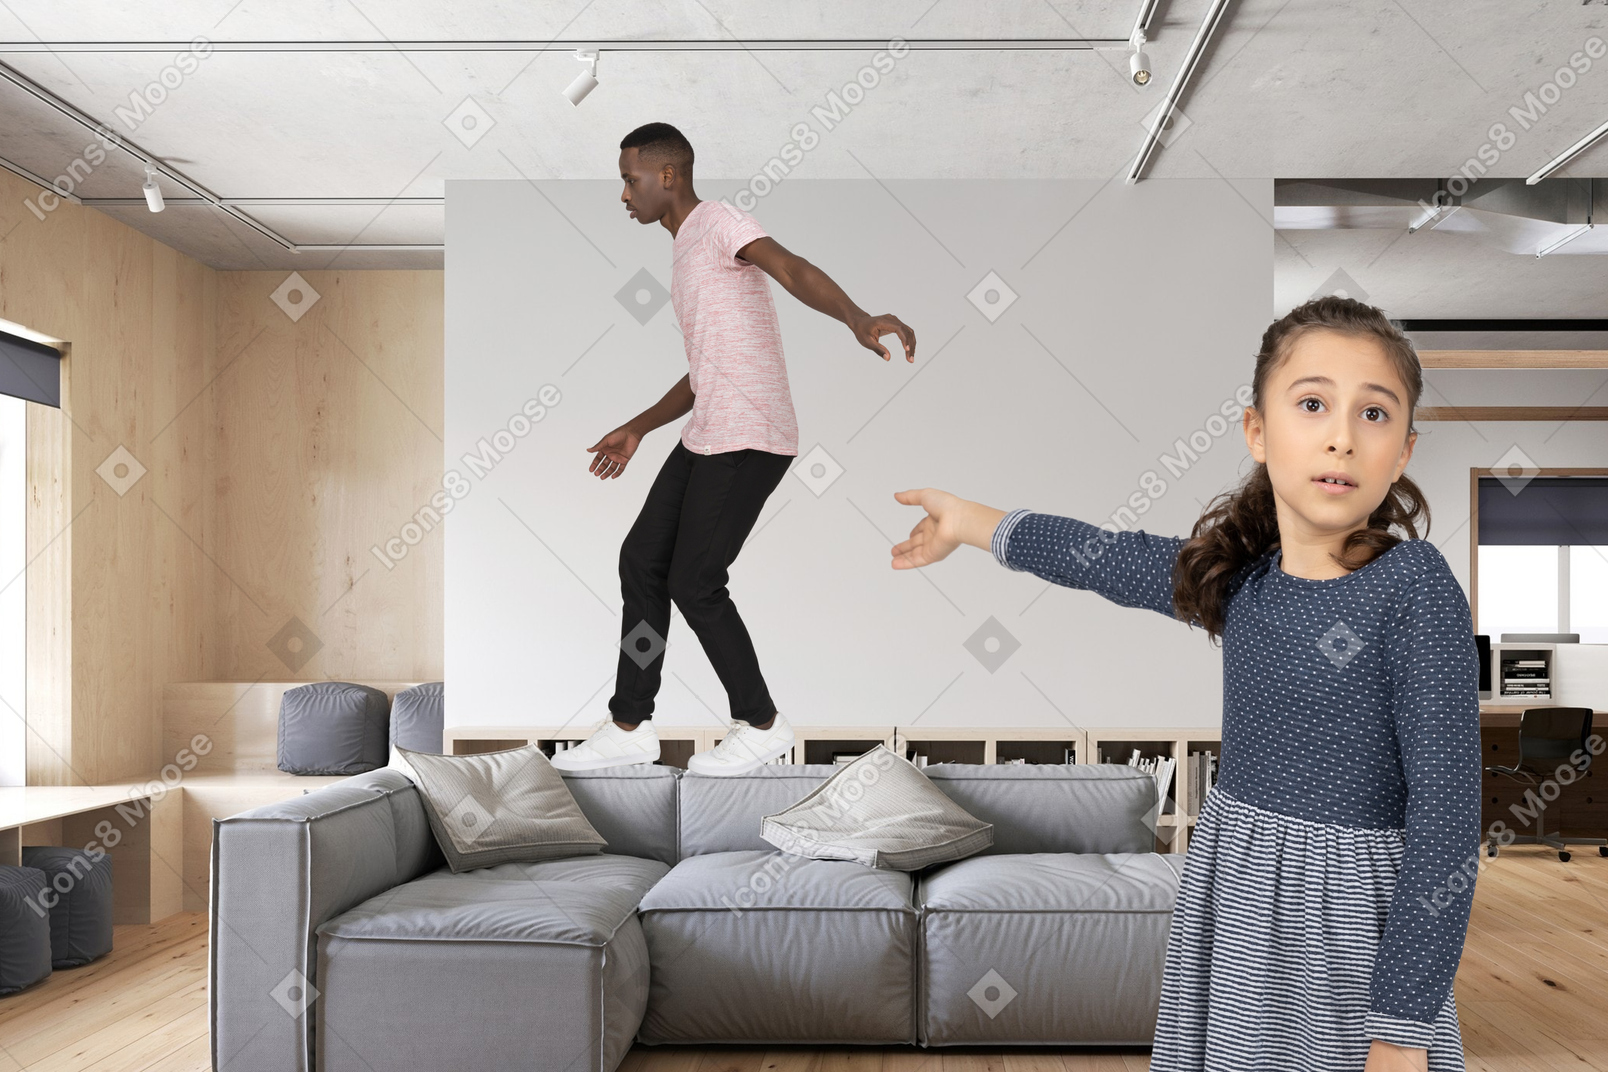 A girl pointing at a man walking on a sofa